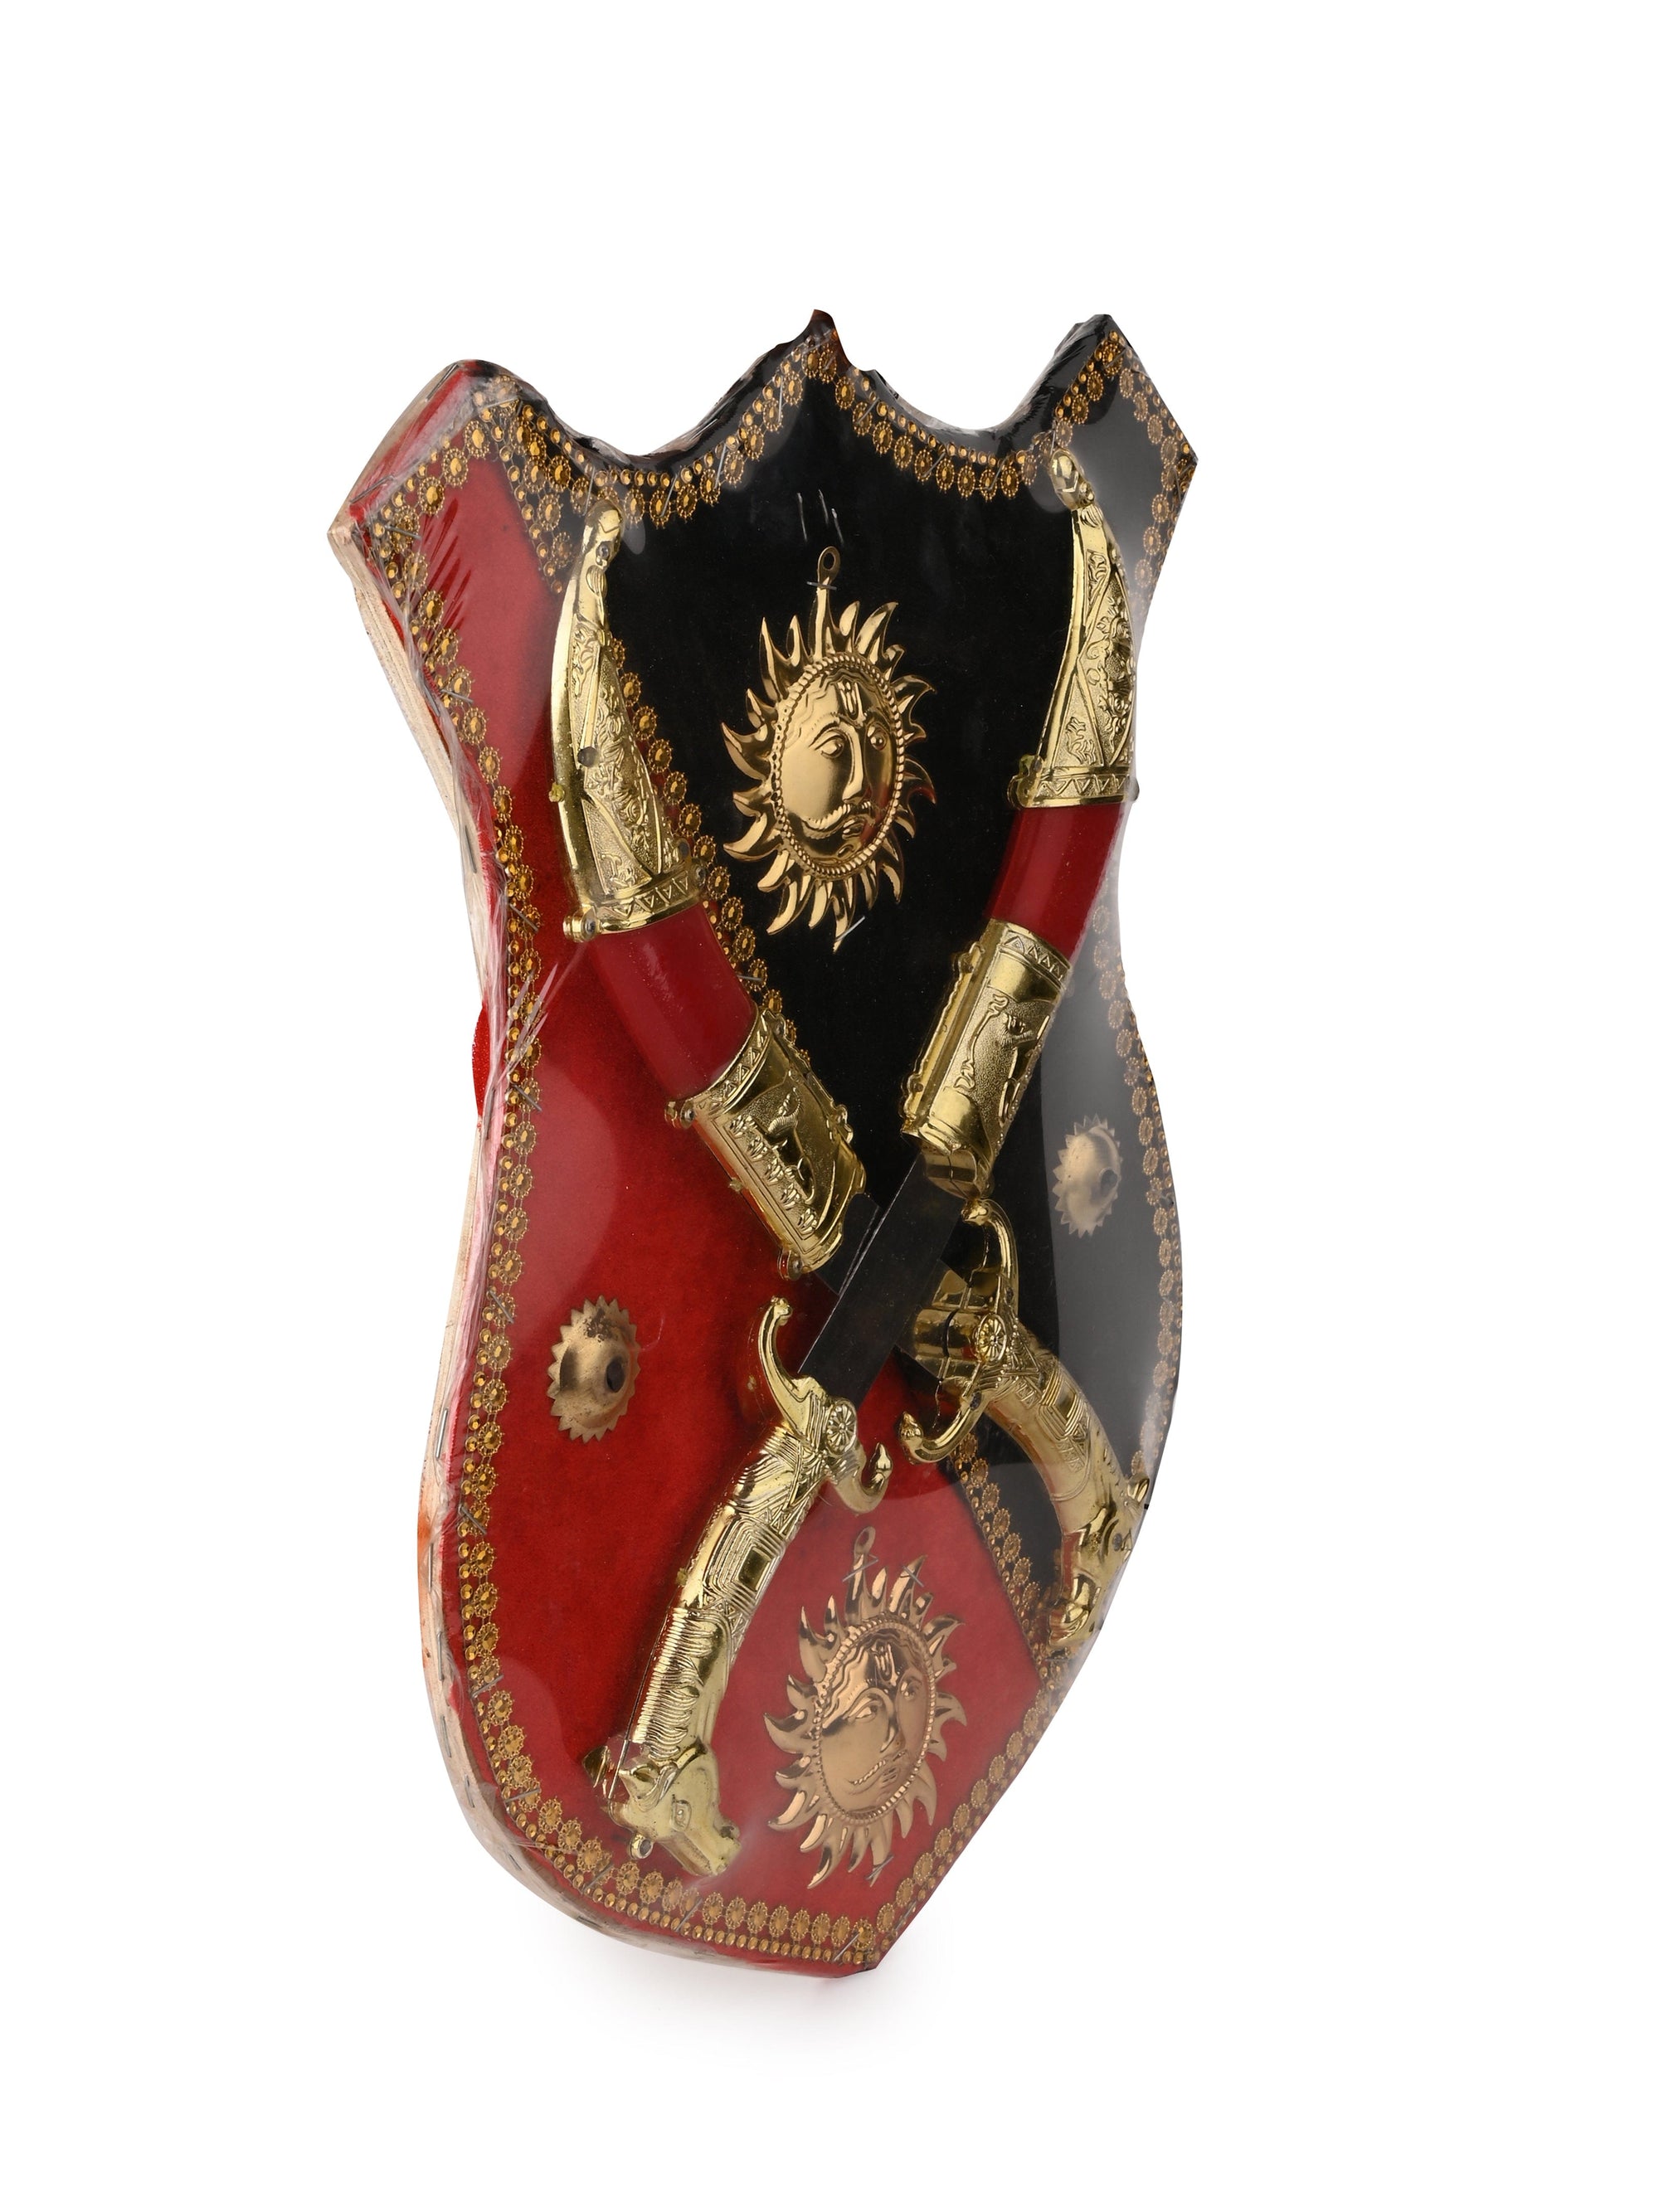 18" Wall Decor Rajput Dhal Talwar / Shield and Knife Set - Red and Black - The Heritage Artifacts